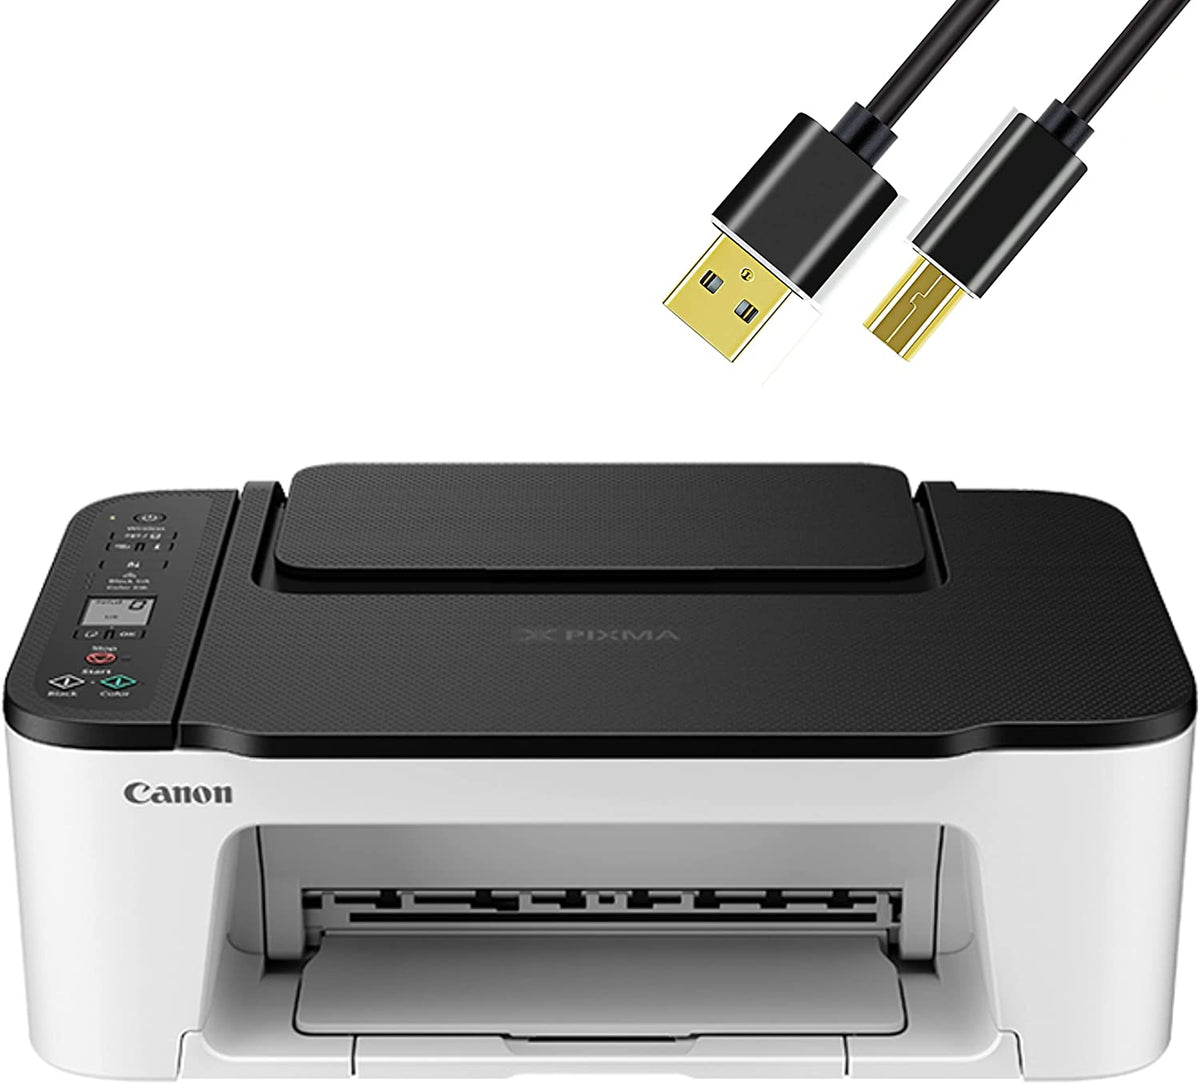 Canon Wireless Inkjet All in One Printer, Print Copy Fax Scan Mobile